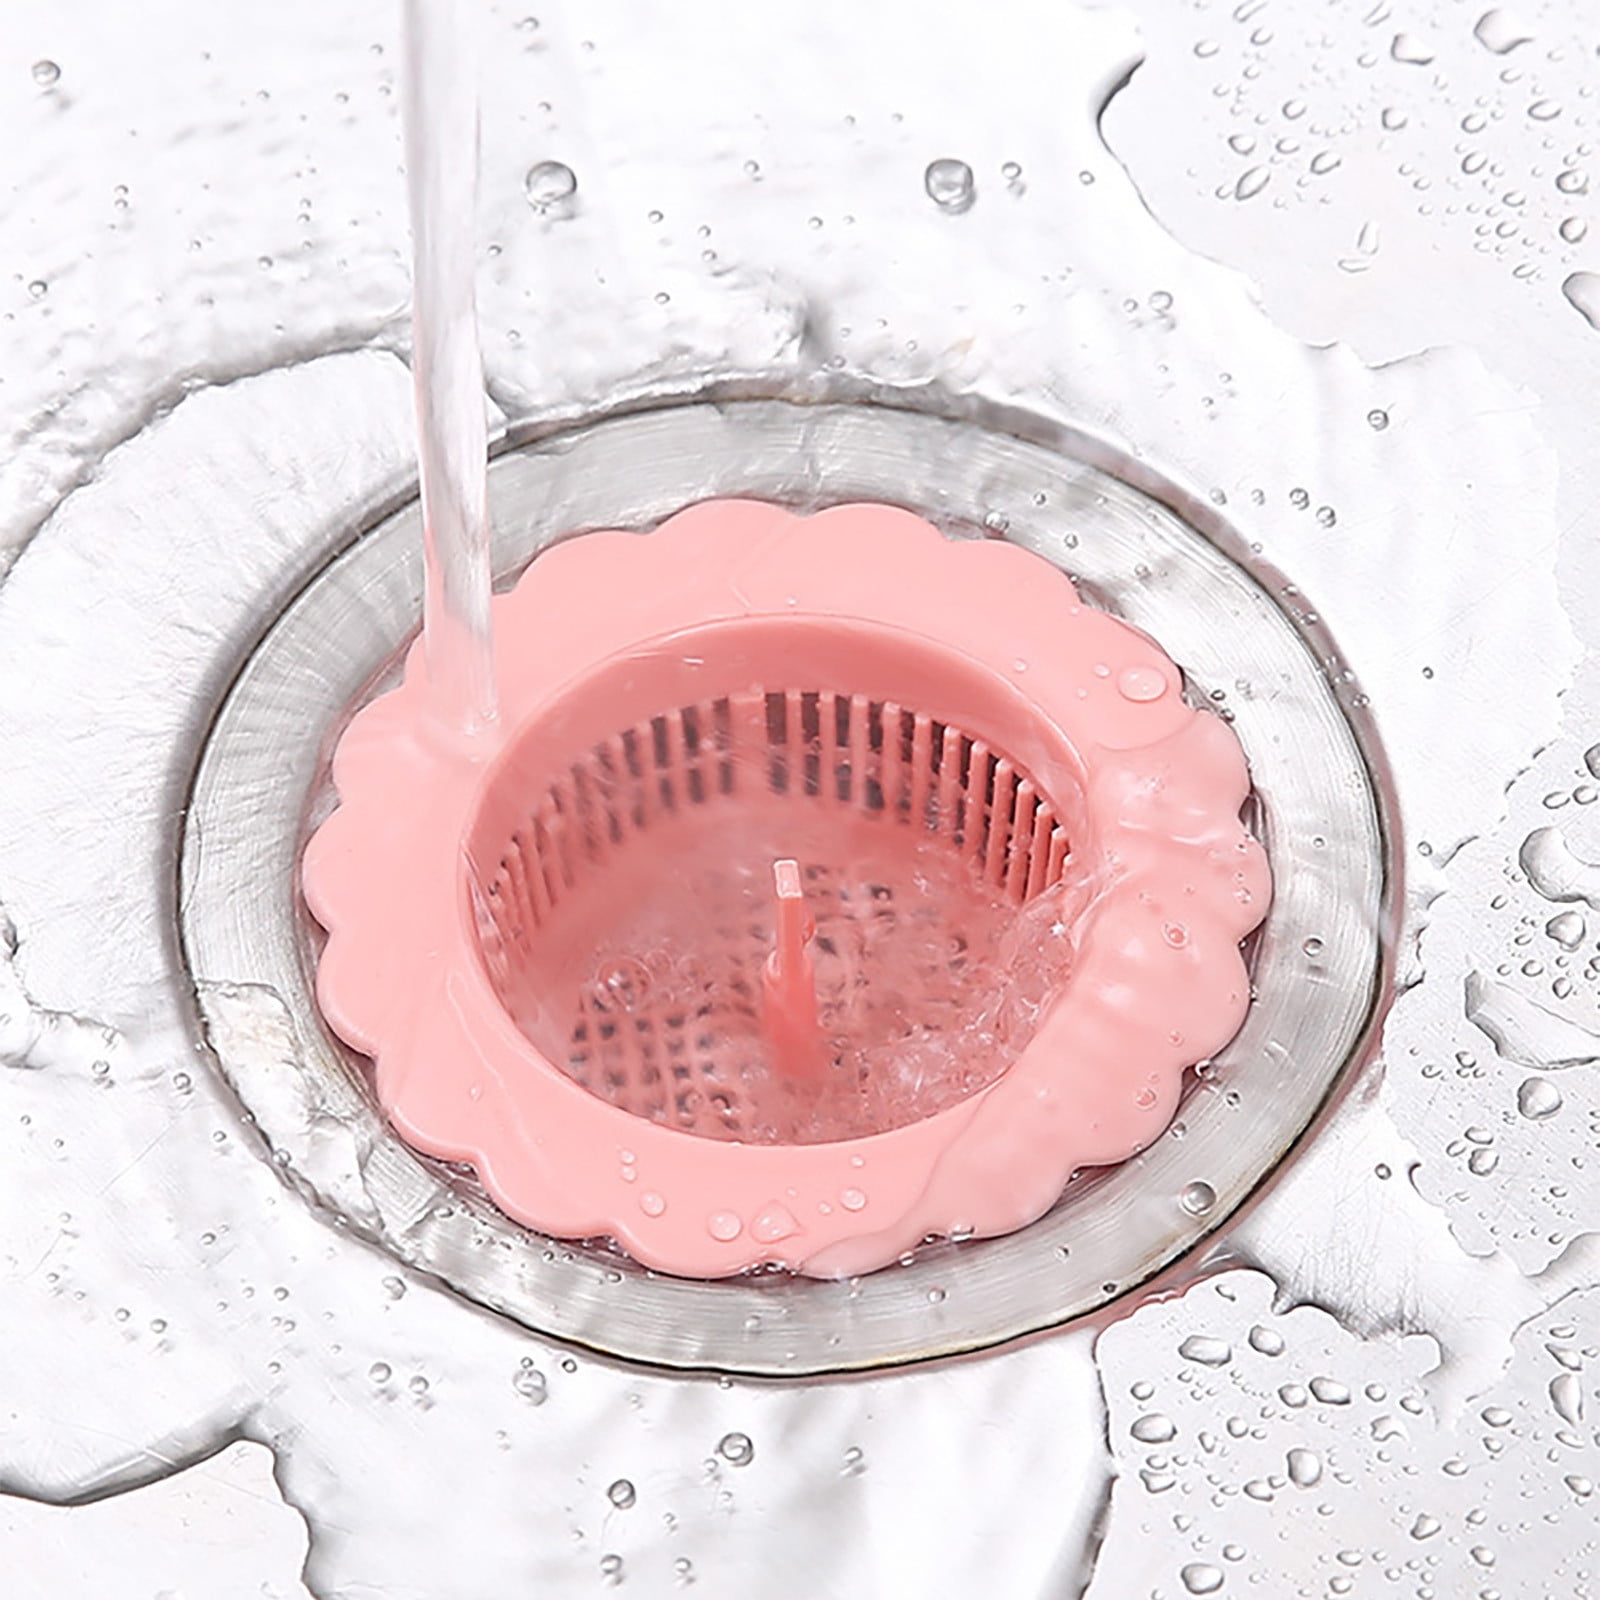 Food Safe Silicone TT0024A Fits In Most Standard Sinks PINK In-Sink Strainer 